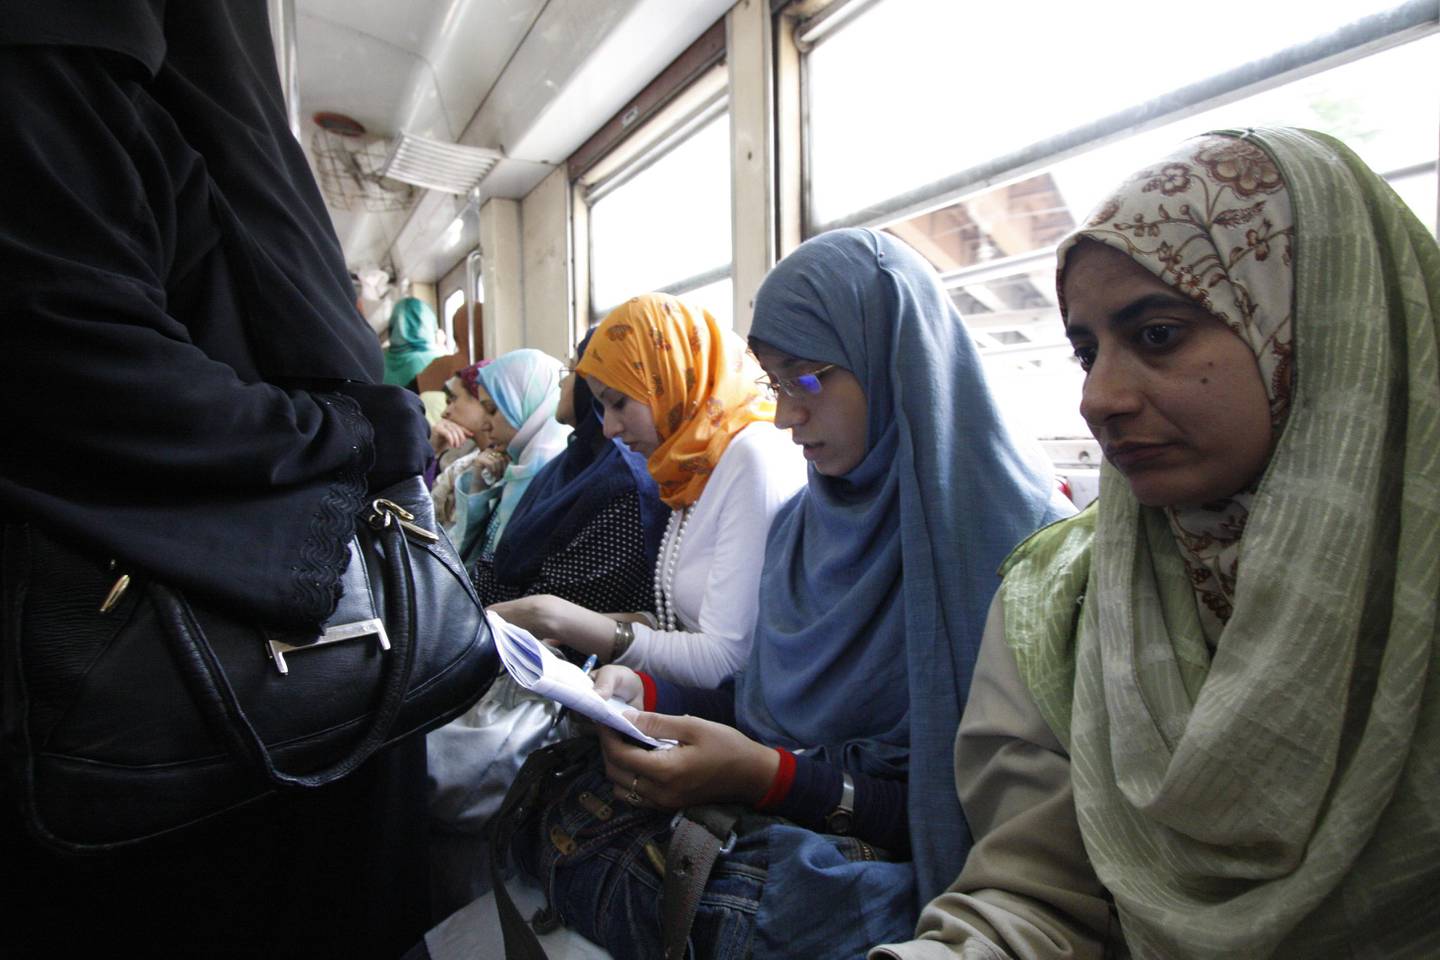 Women ride the Cairo metro in the women only car on May 18, 2008.